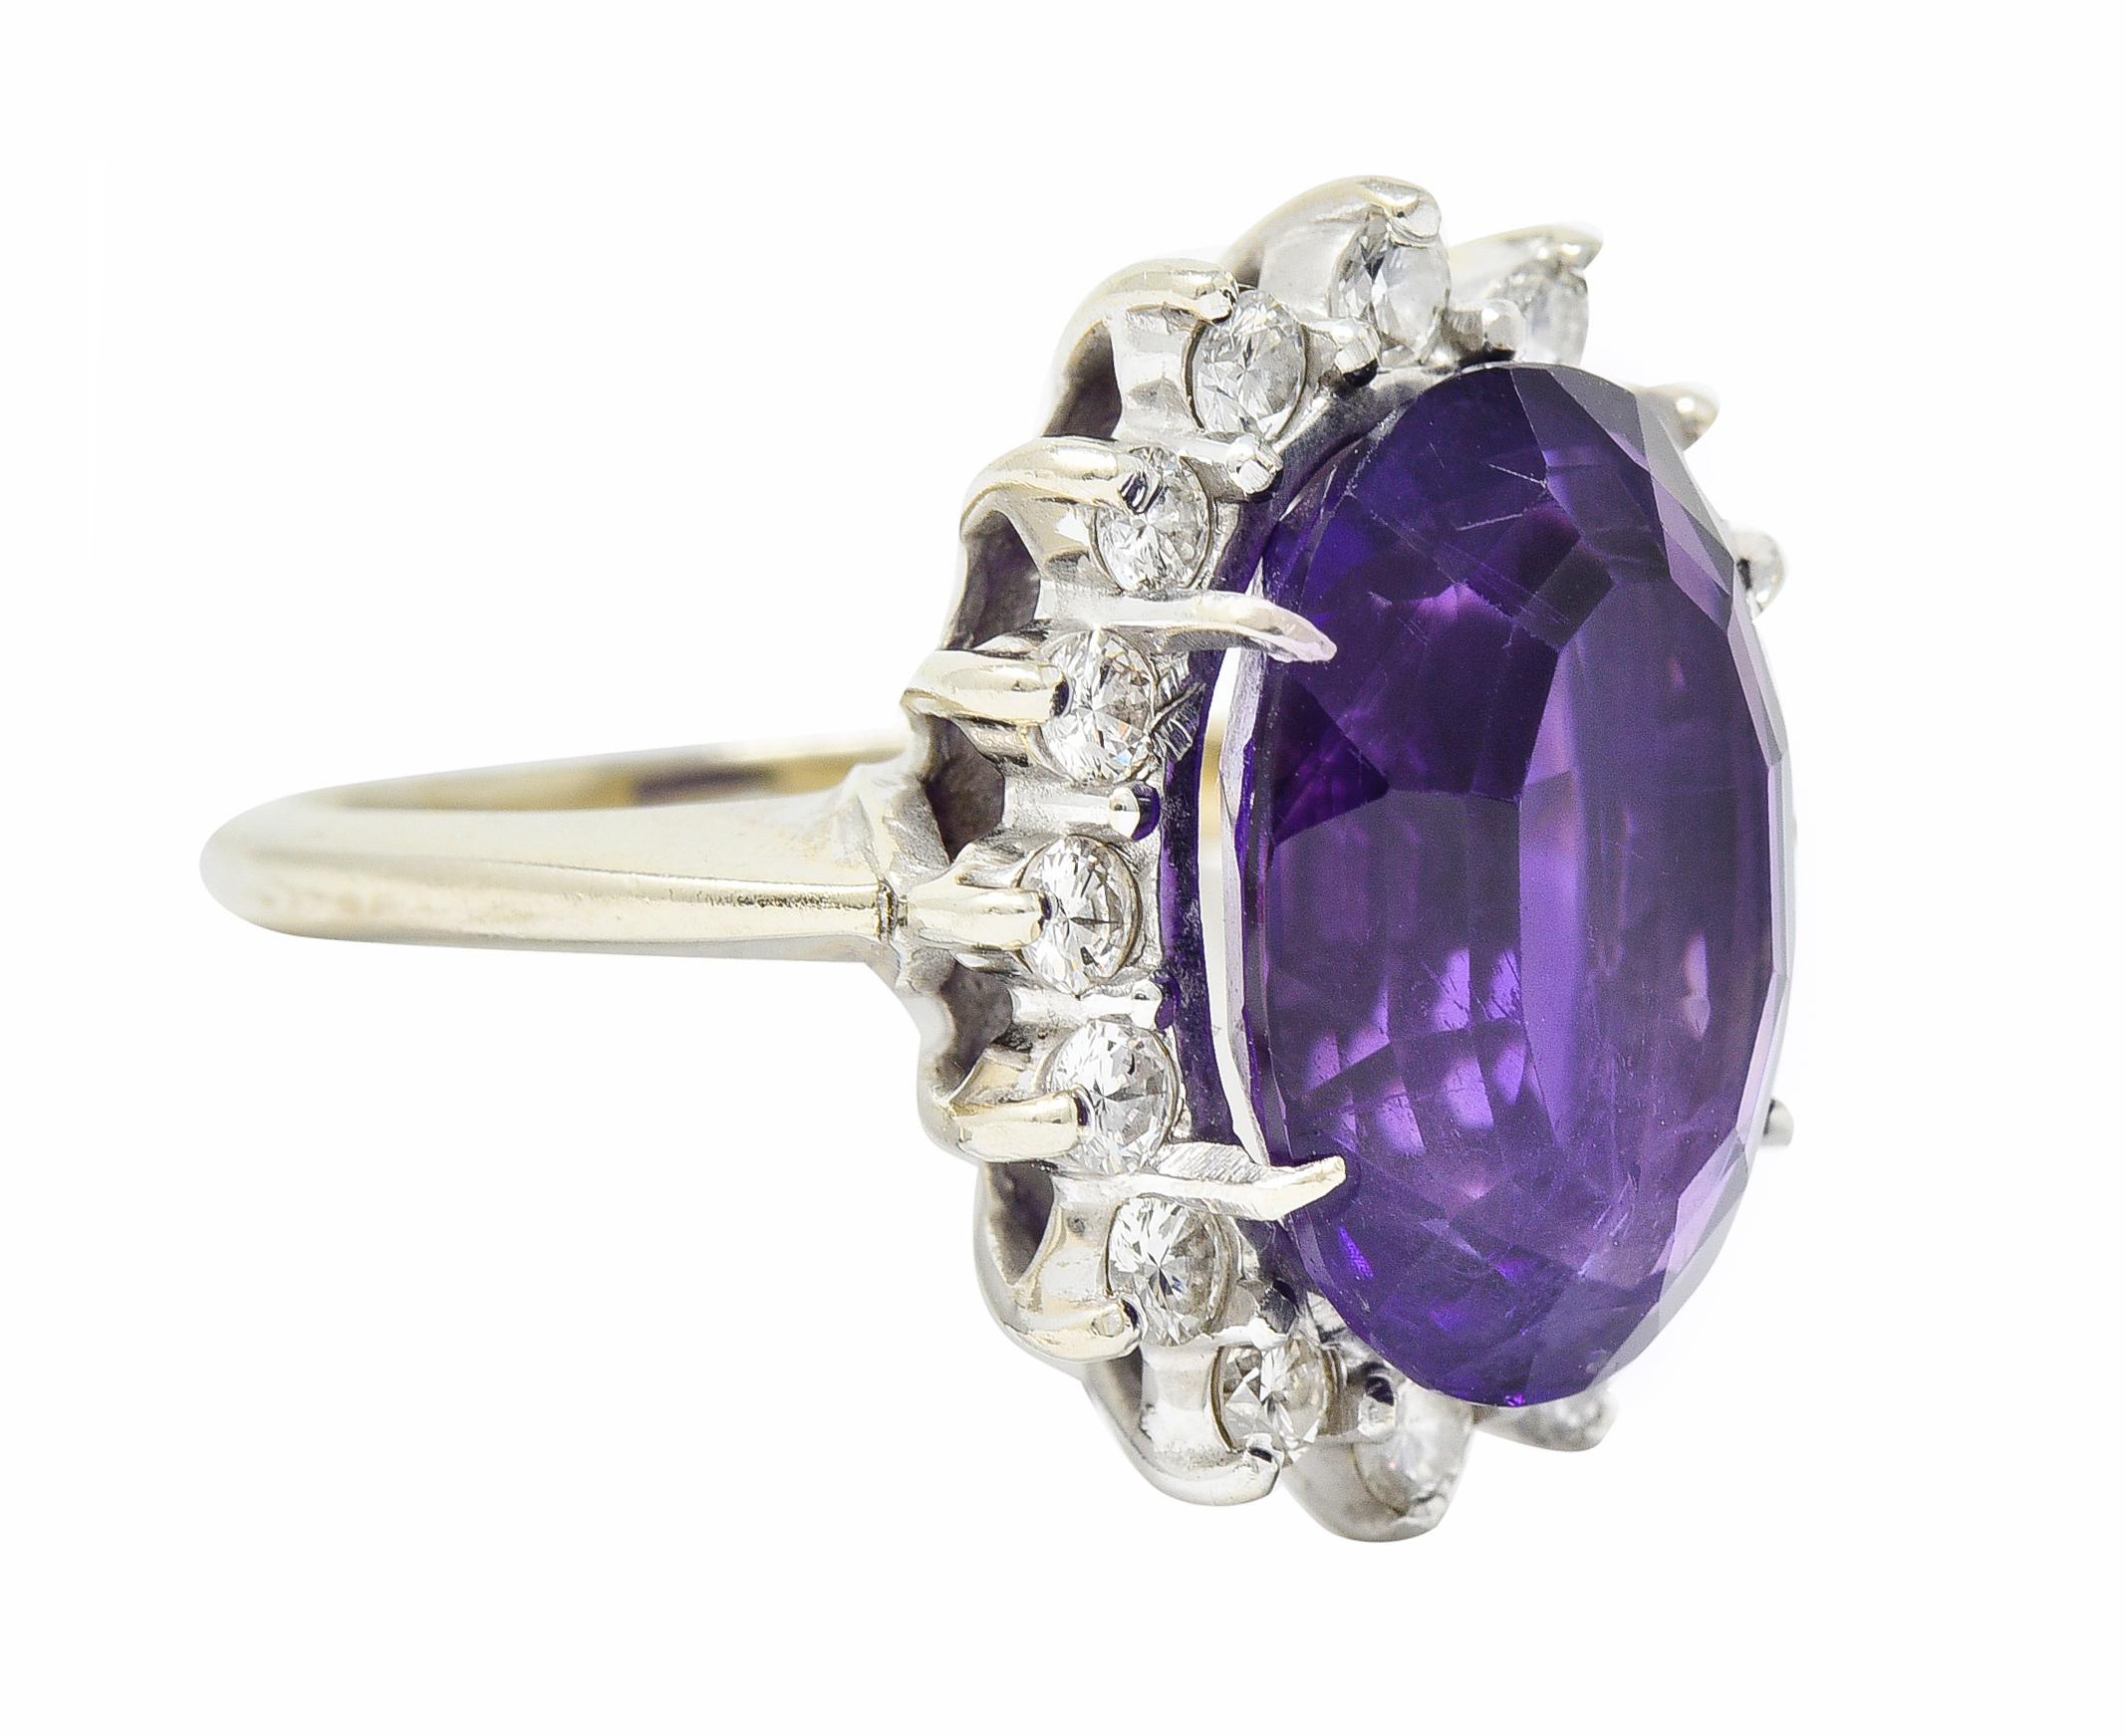 Cluster style ring centers an oval mixed cut measuring approximately 14.1 x 10.0 mm

Transparent with medium-dark purple color; very saturated

With a halo of round brilliant cut diamonds weighing in total approximately 0.50 carat; G/H carat with VS